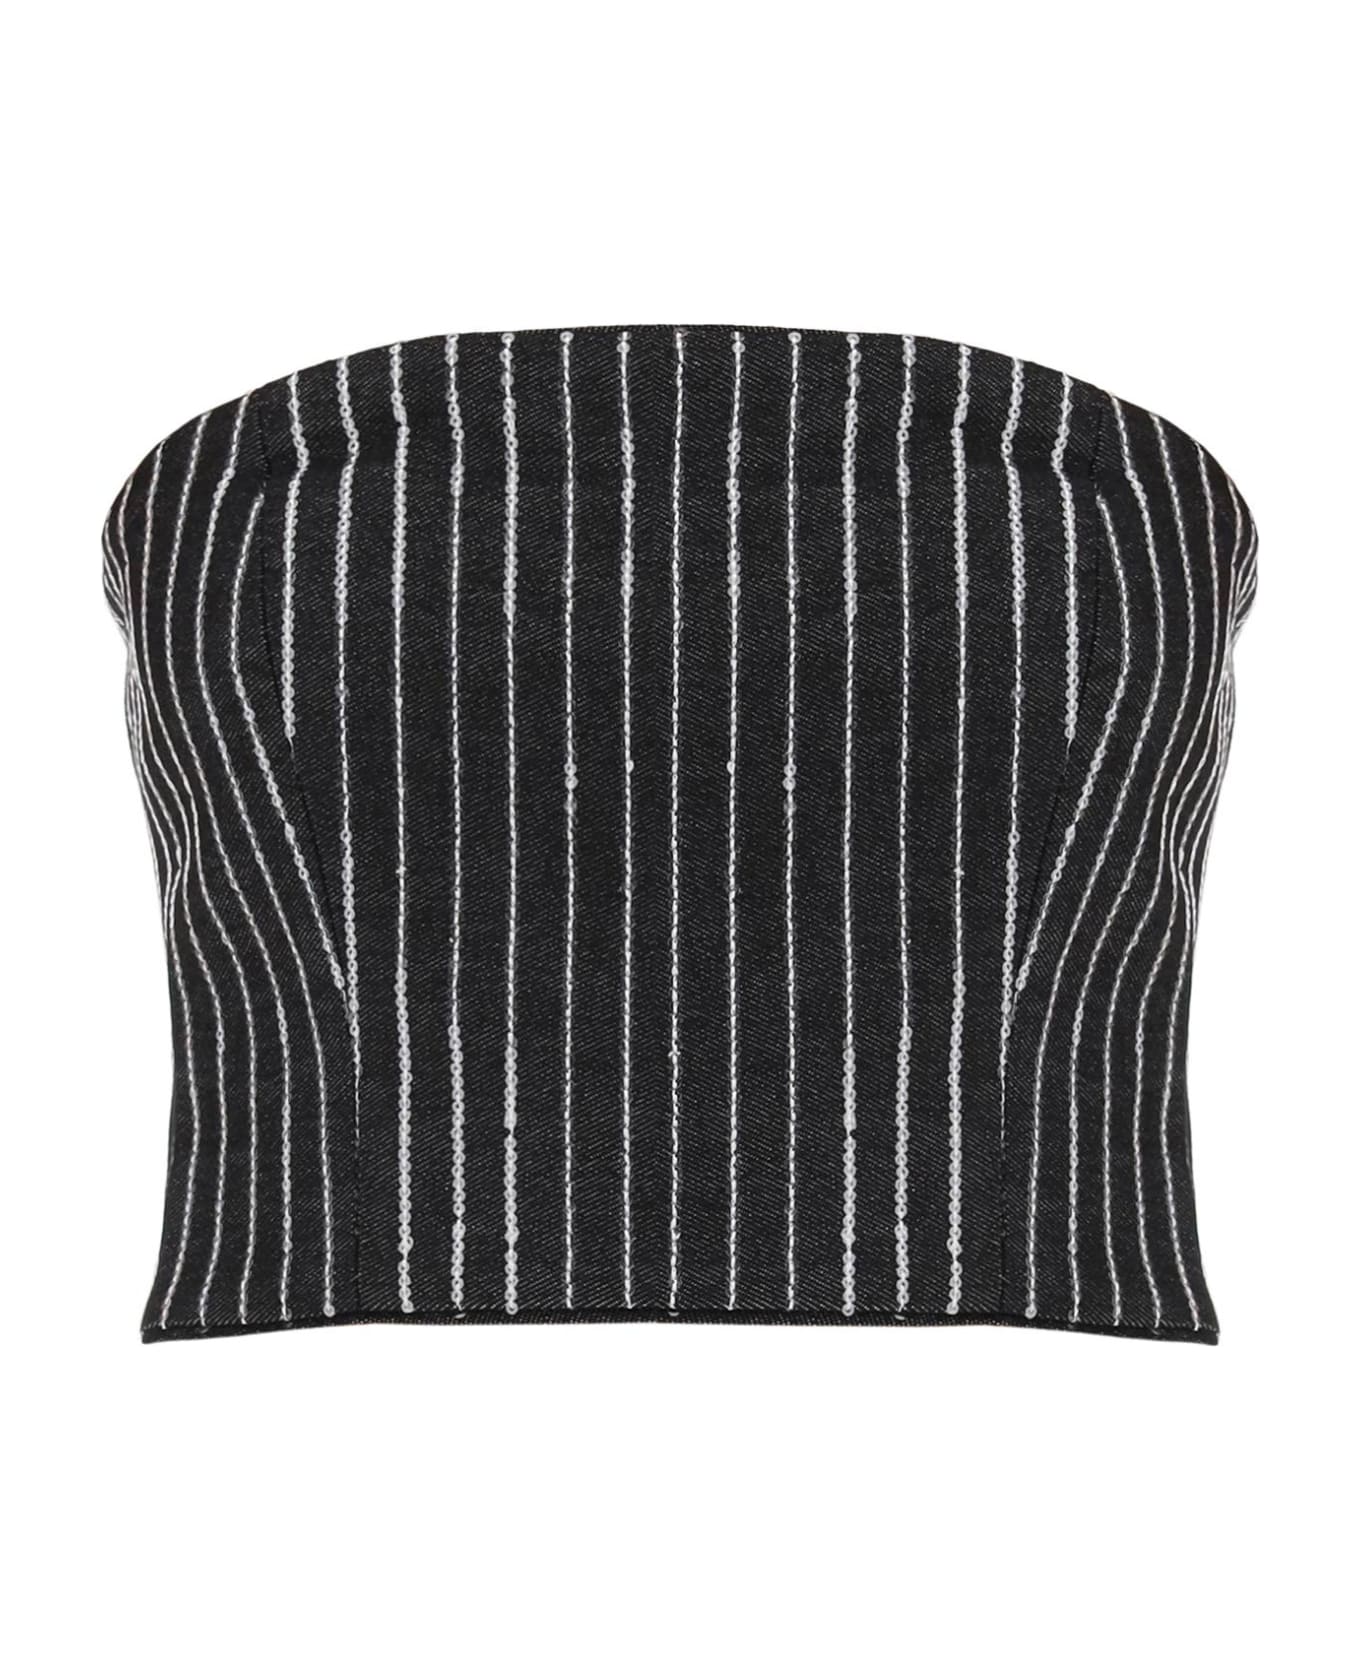 Rotate by Birger Christensen Cropped Top With Sequined Stripes - BLACK (Black)